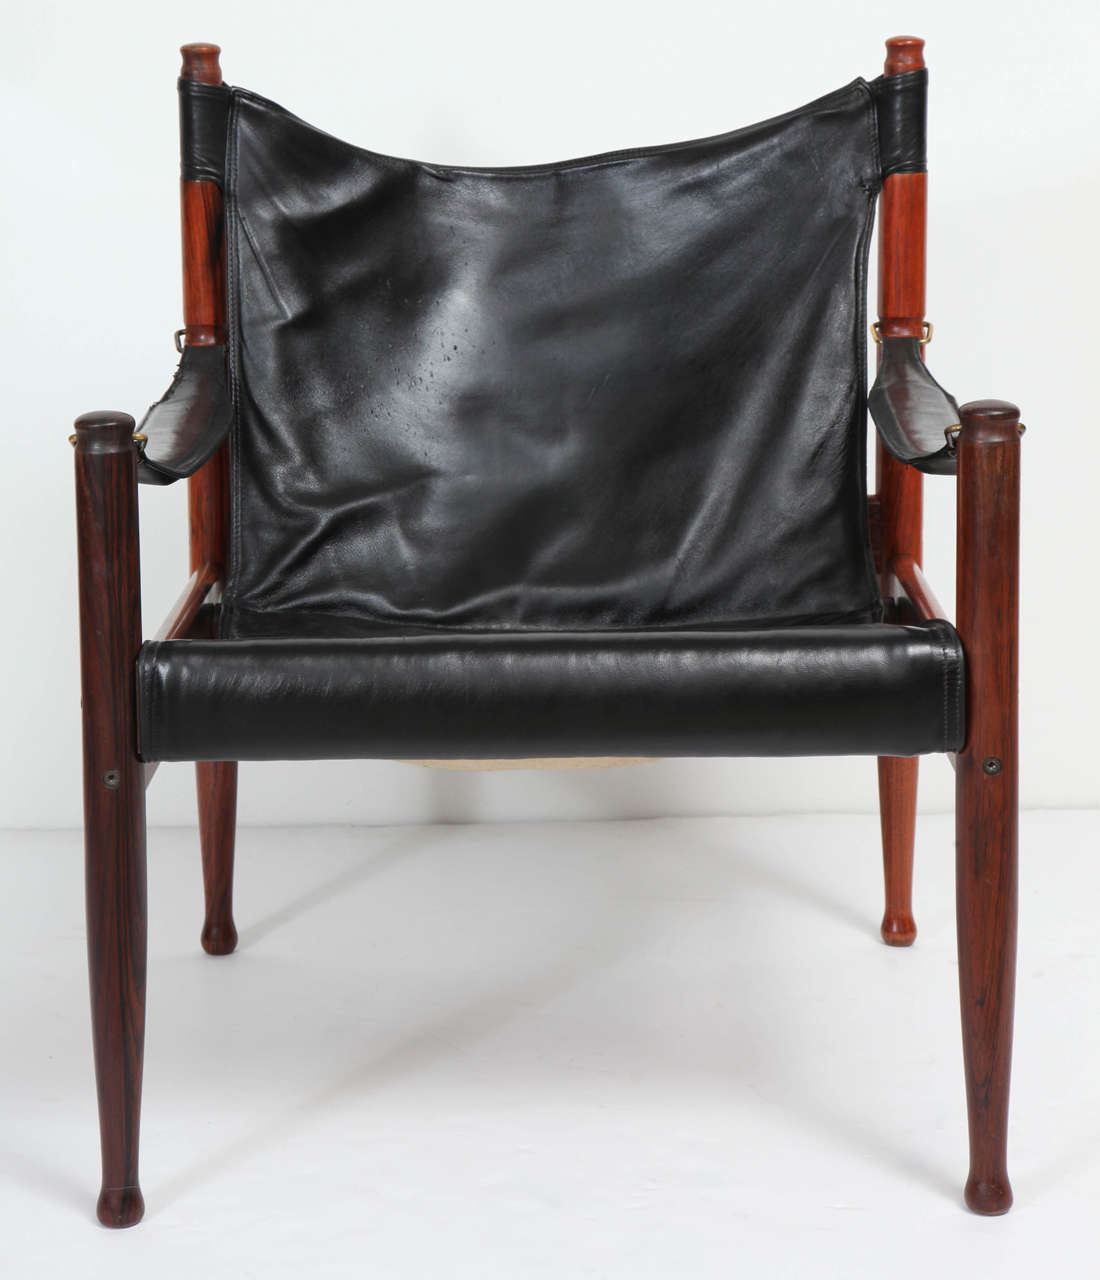 Safari chair by Erik Worts for N. Eilersen, Denmark, 1960s. Brazilian rosewood frame with brass detail and original black leather upholstery.